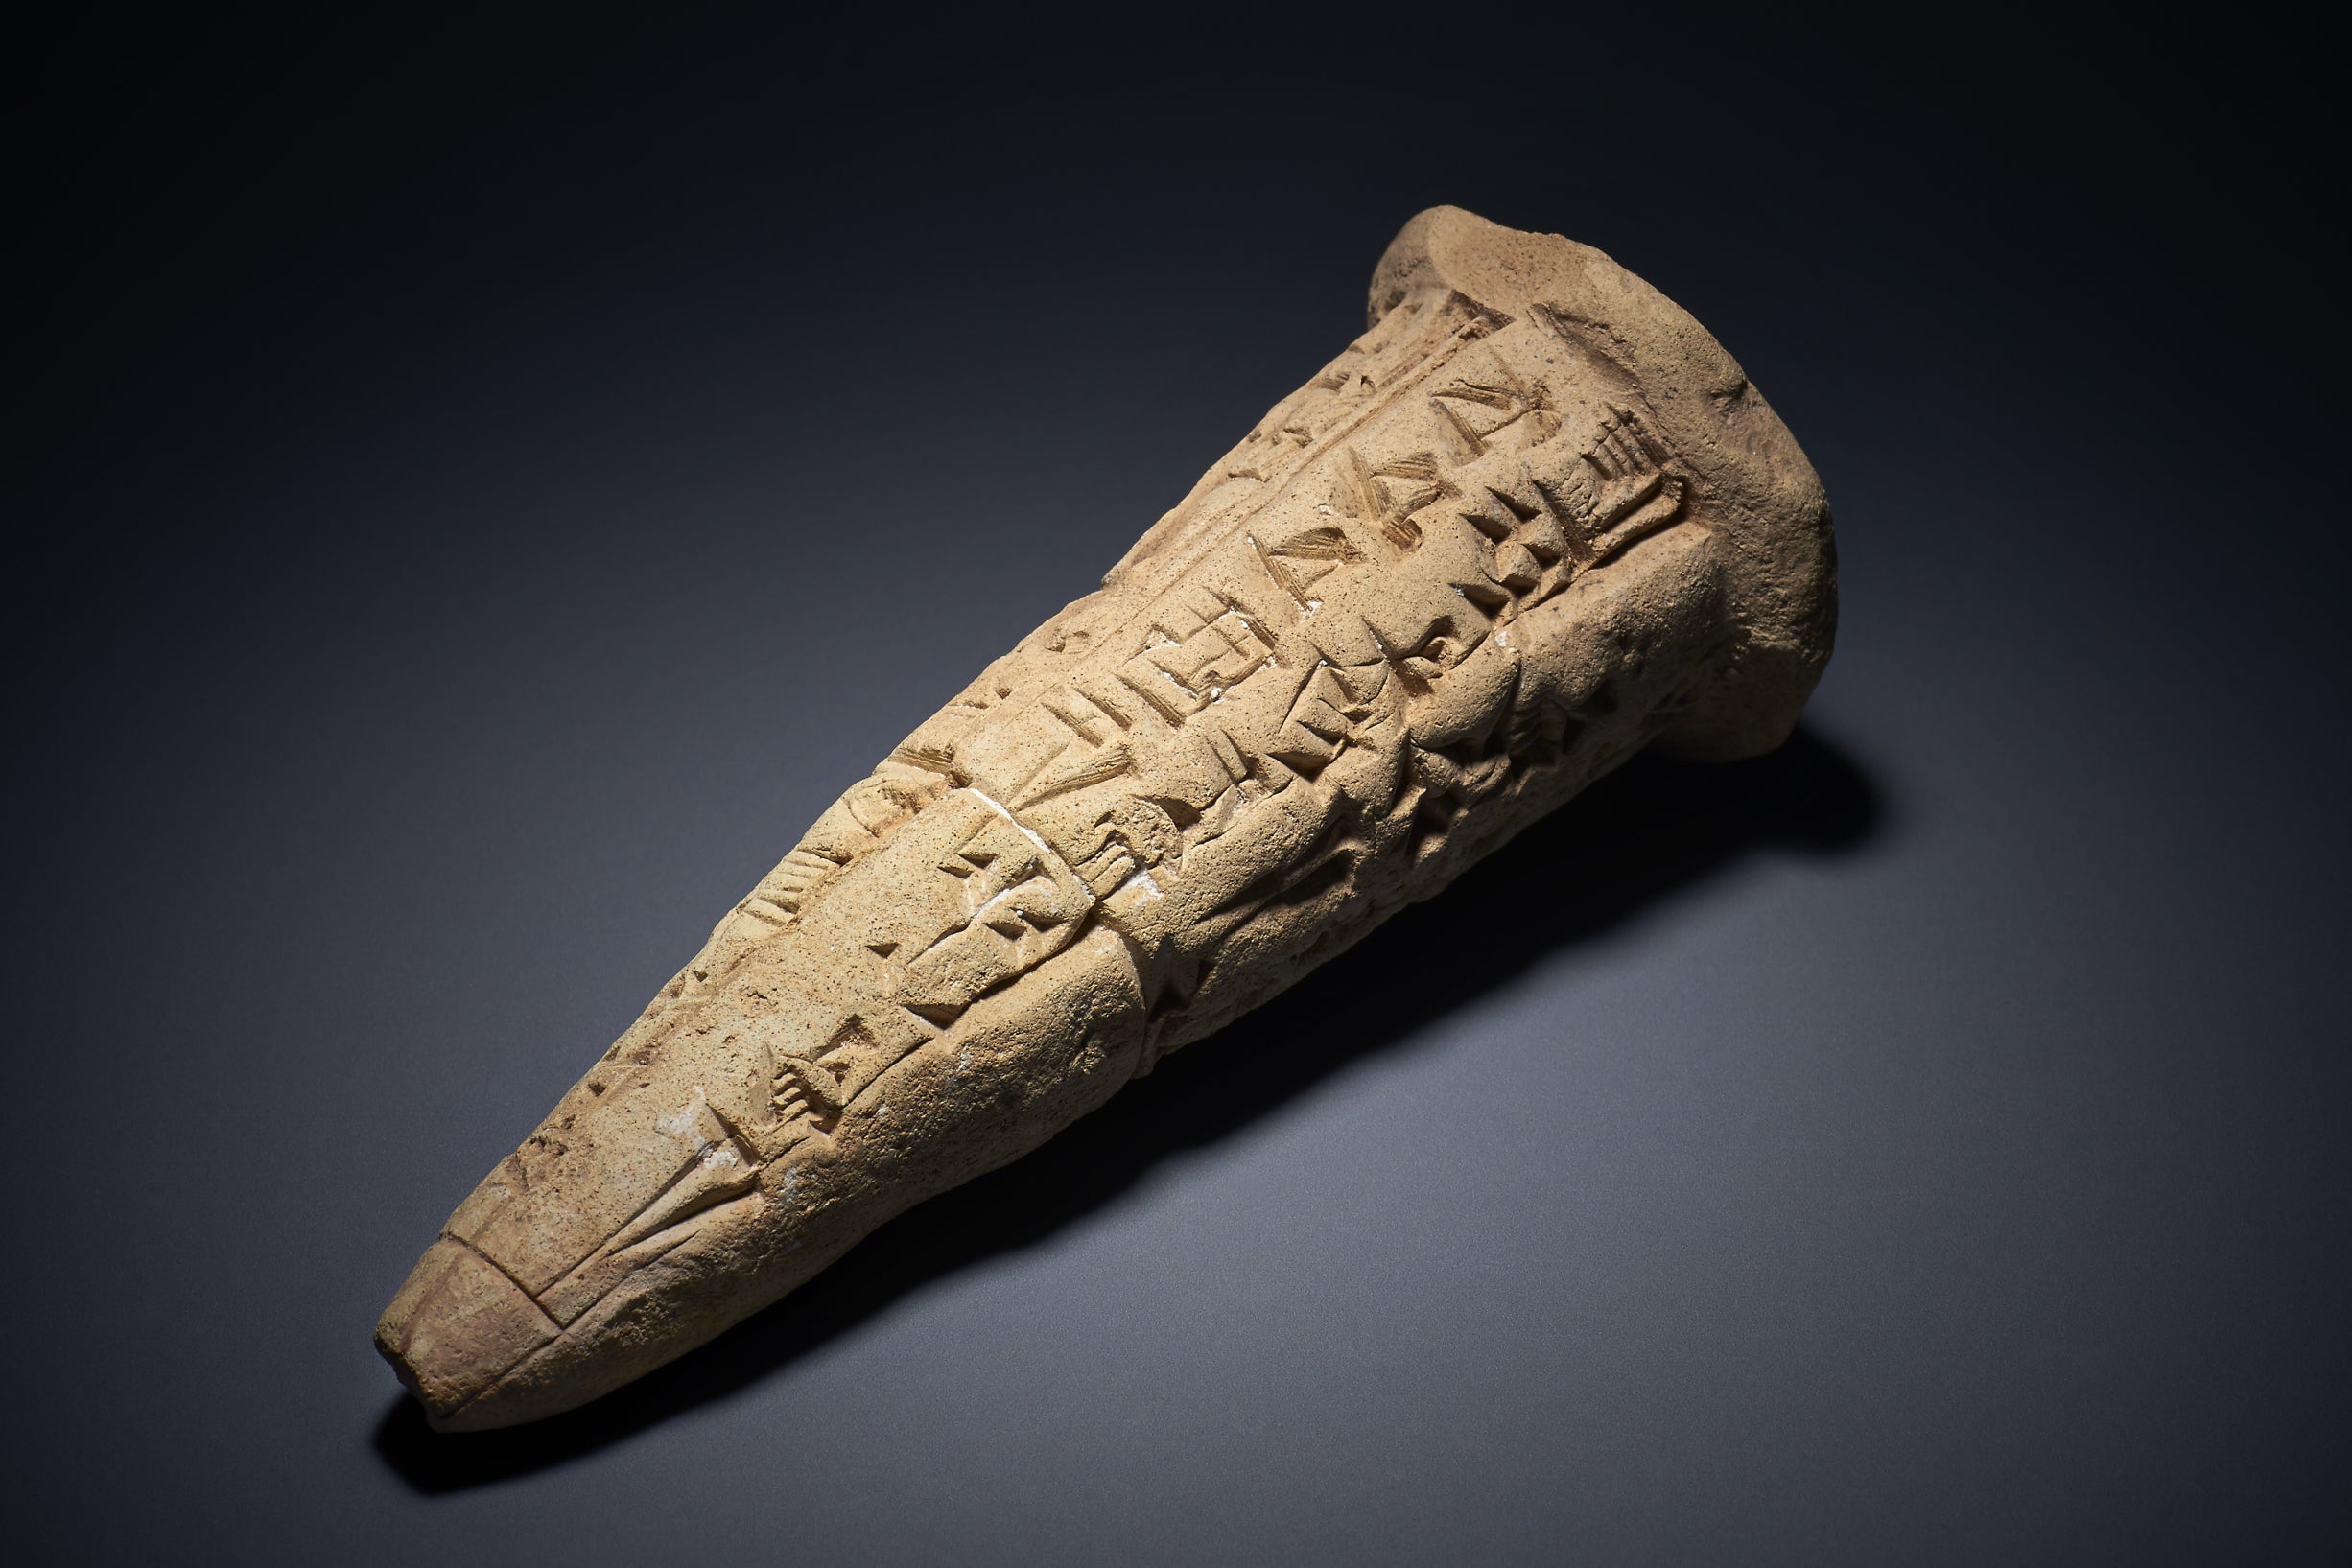 The objects being returned to Iraq include three complete fired clay cones, each with an identical cuneiform inscription